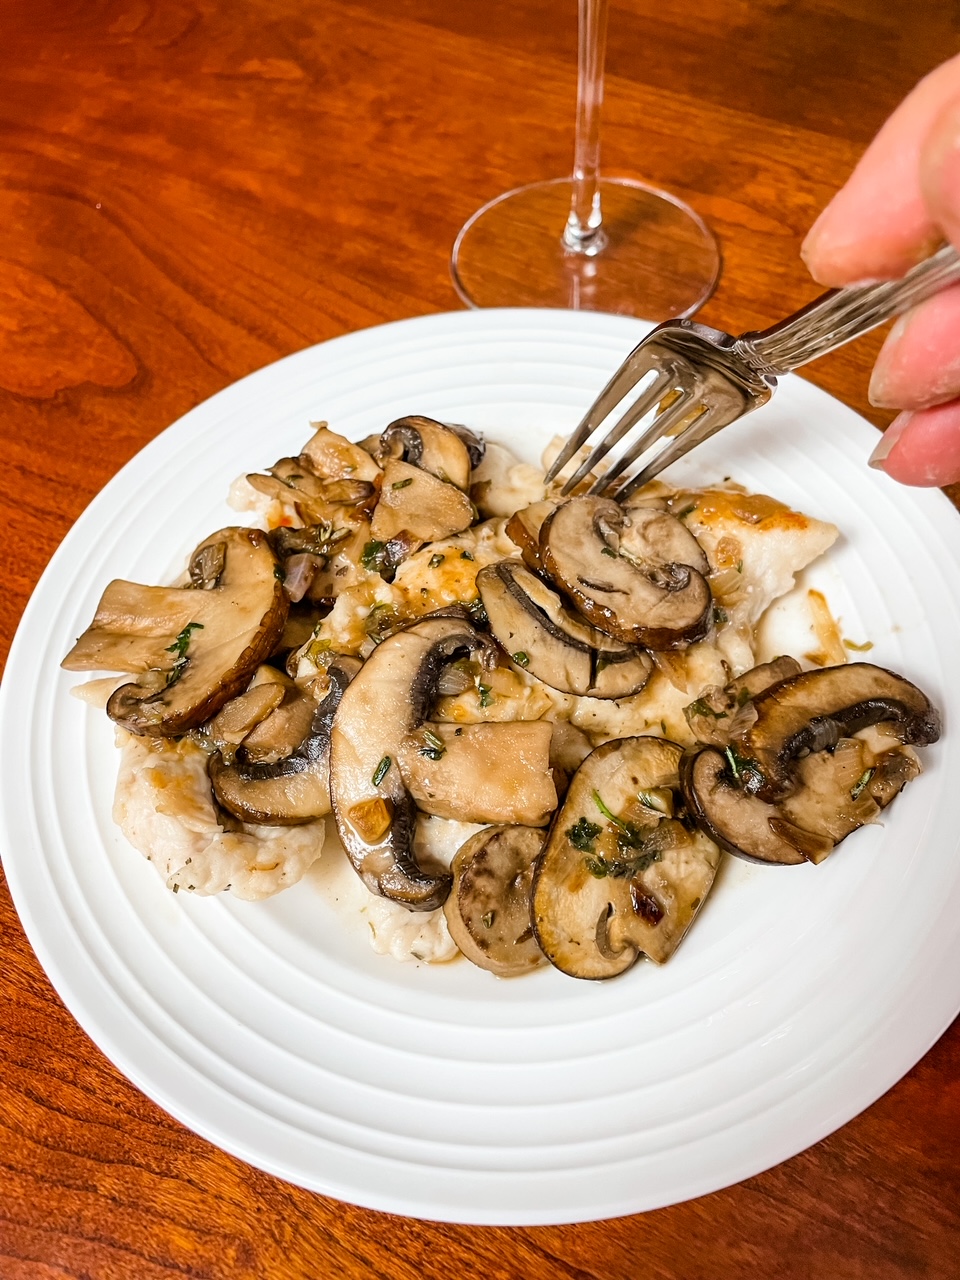 The finished Healthier Chicken Marsala on a plate